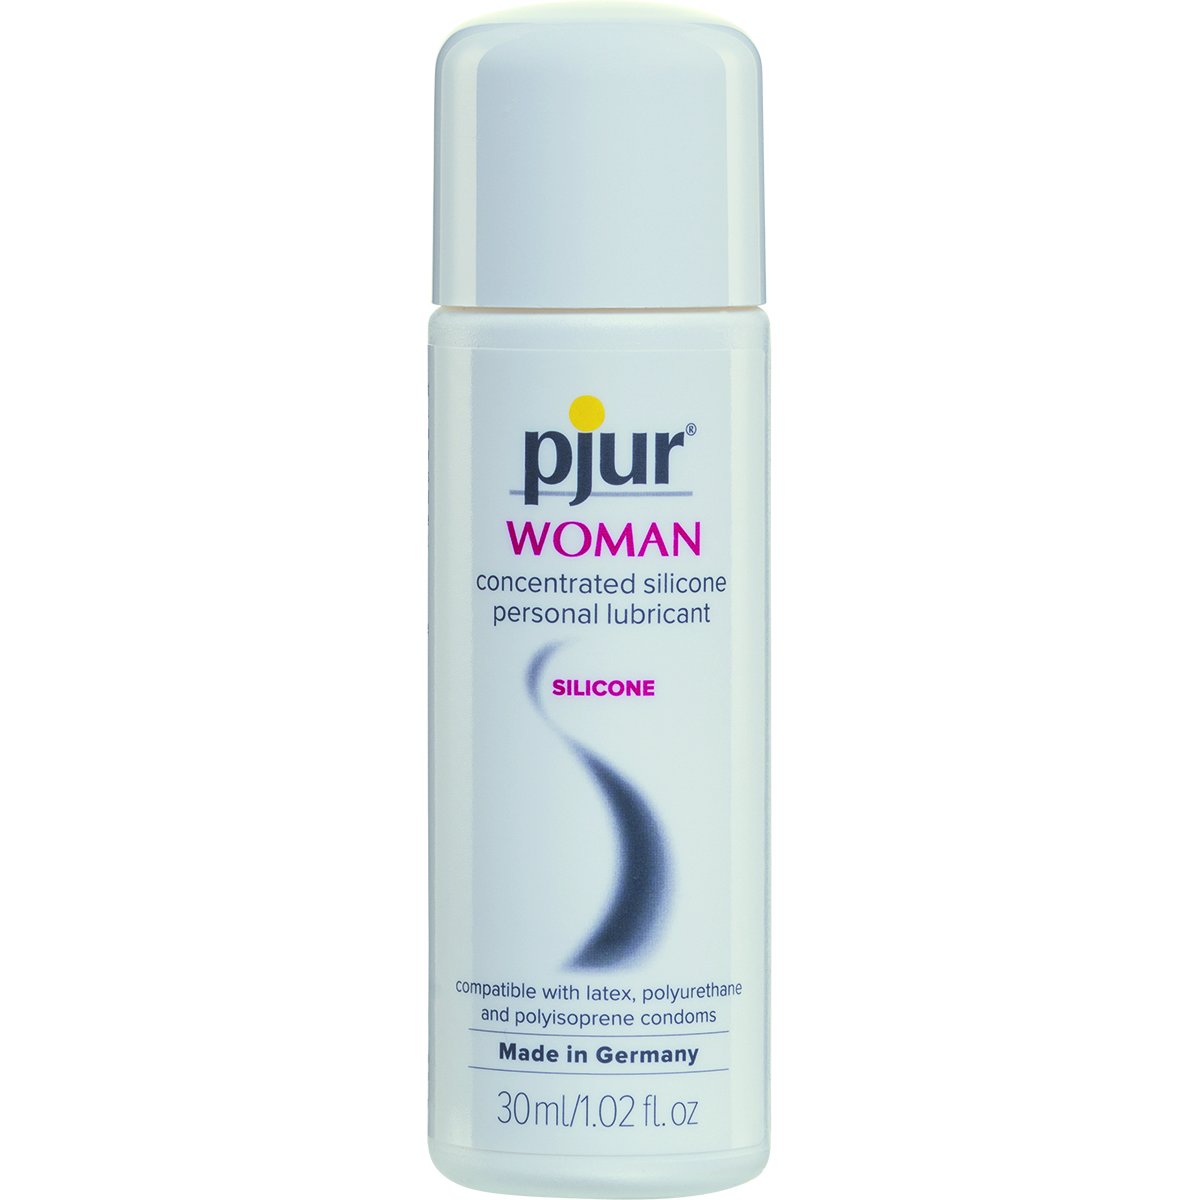 Pjur Woman - Buy At Luxury Toy X - Free 3-Day Shipping